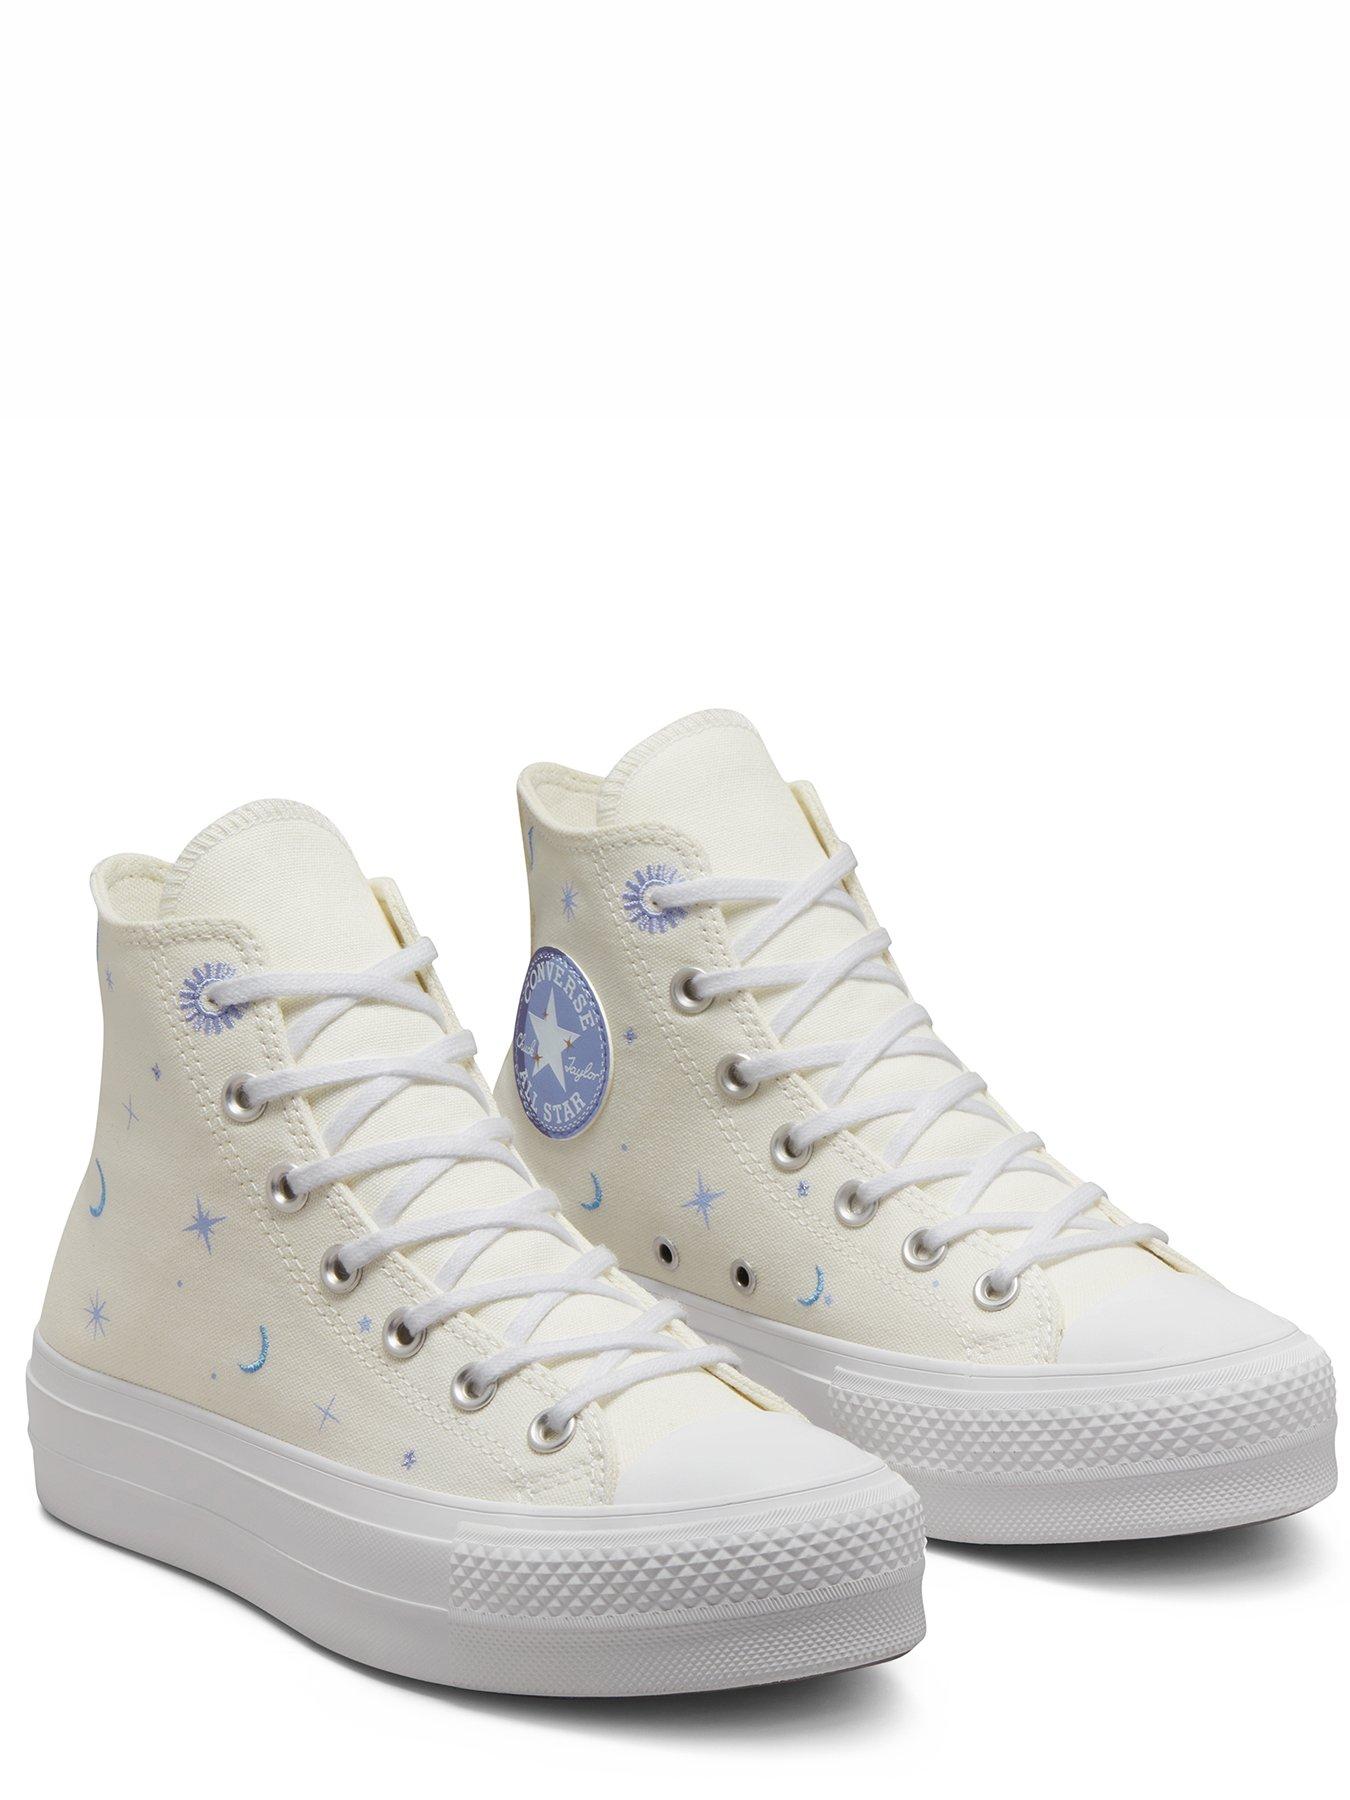 Converse Taylor All Star Lift Hi-Tops - Off-White | very.co.uk